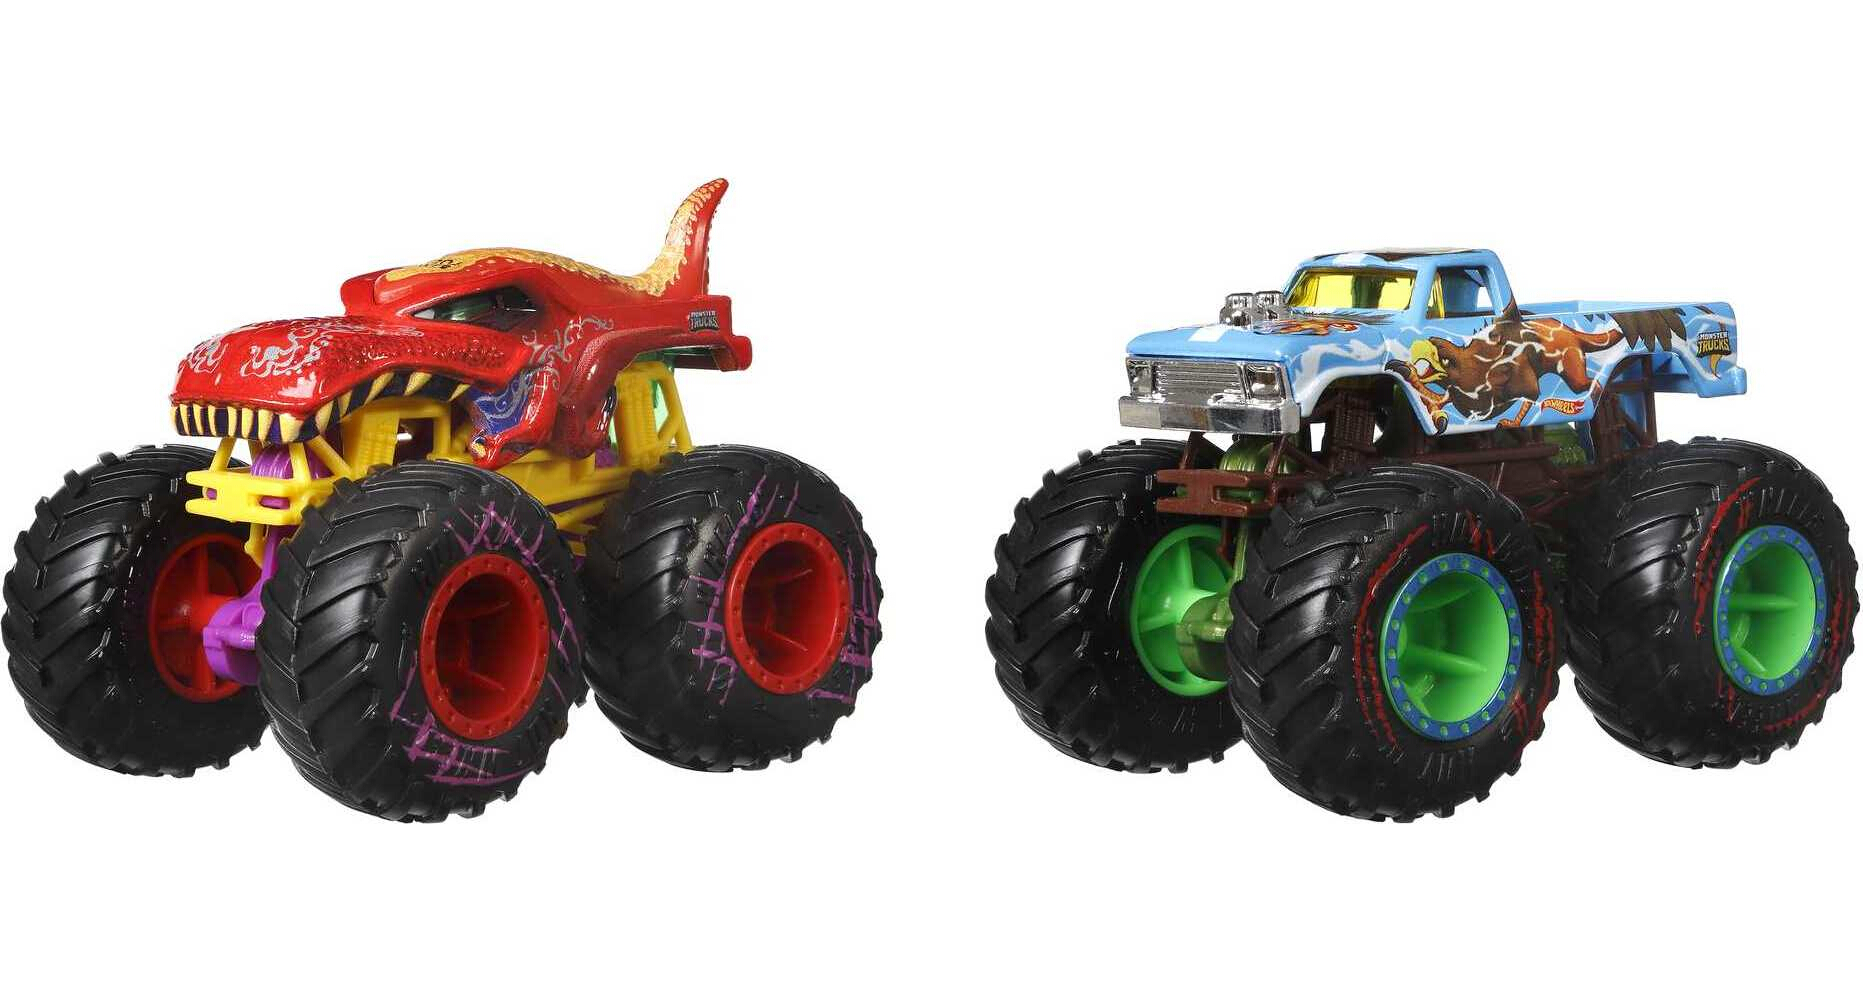 Hot Wheels Monster Trucks Roarin' Rumble 2-Pack of 1:64 Scale Toy Trucks (Styles May Vary) - image 2 of 4